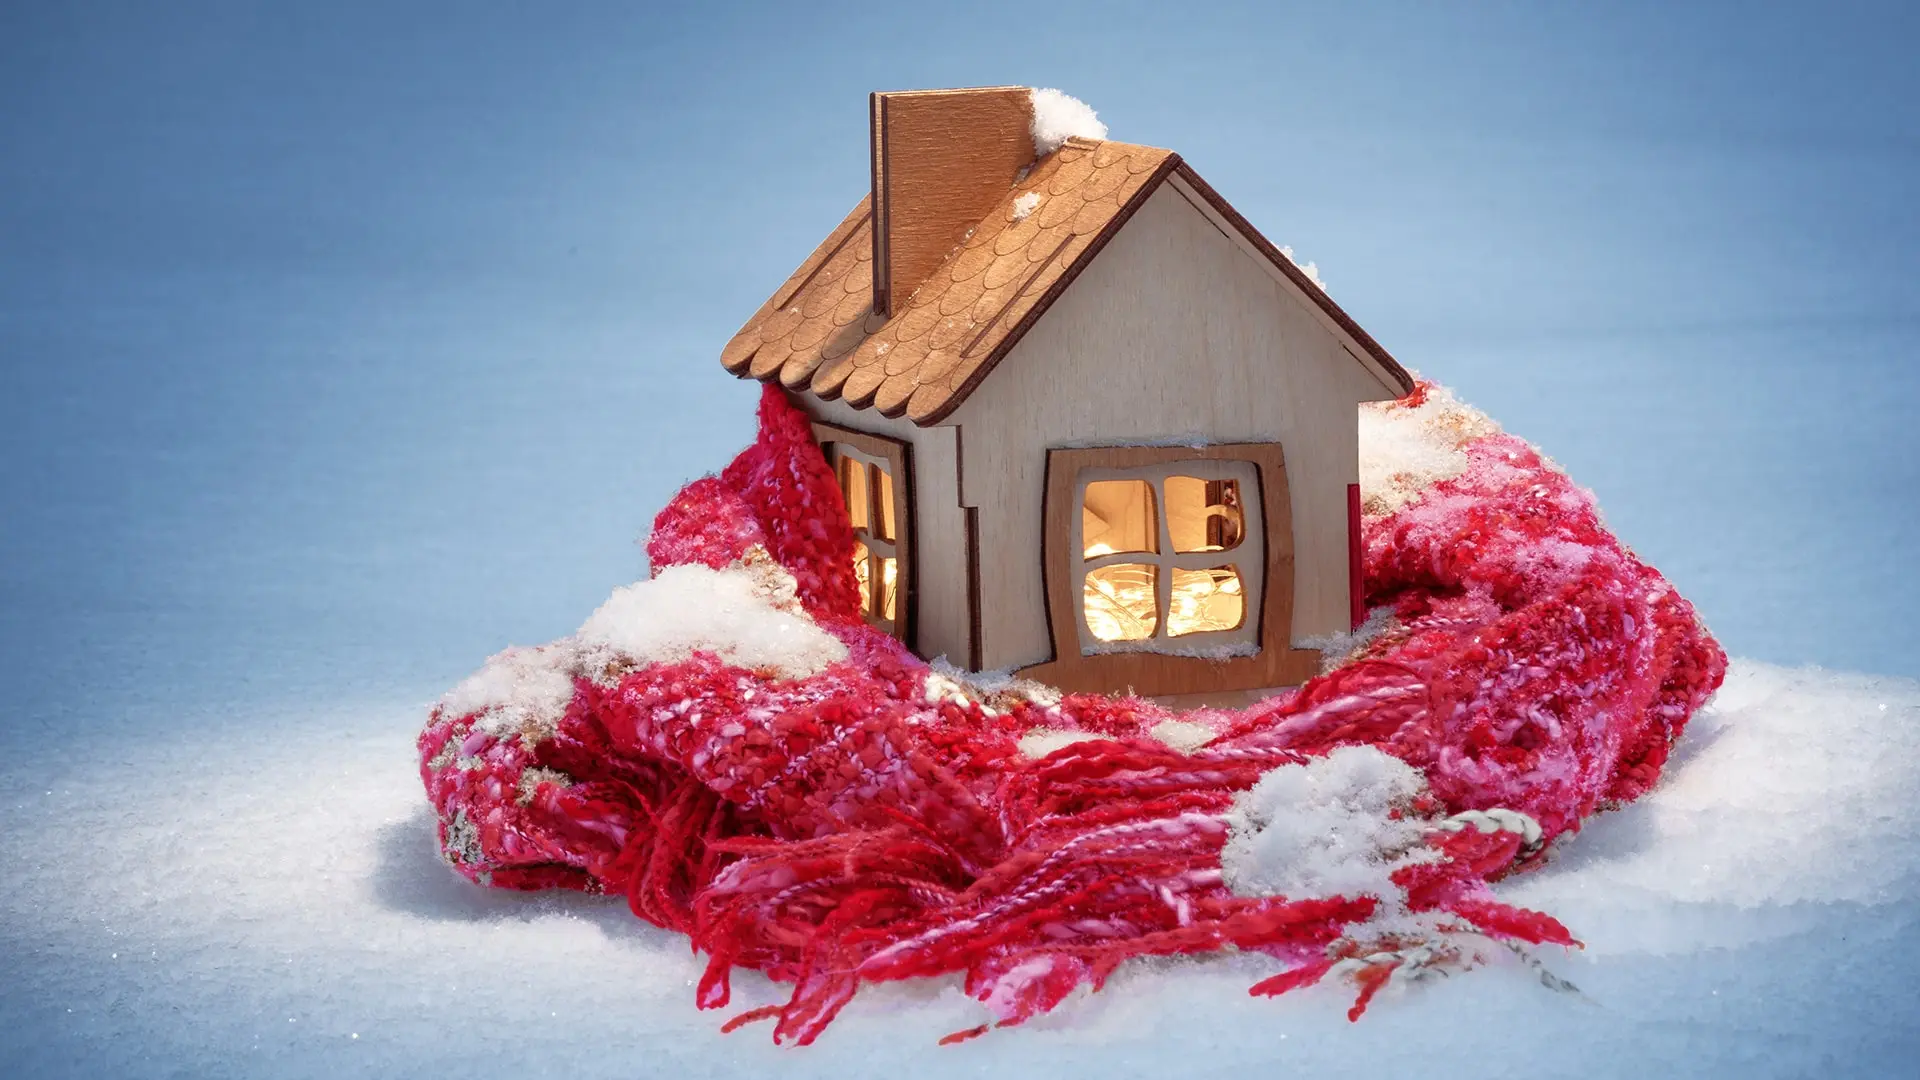 figurine house wrapped in a scarf with snow around it